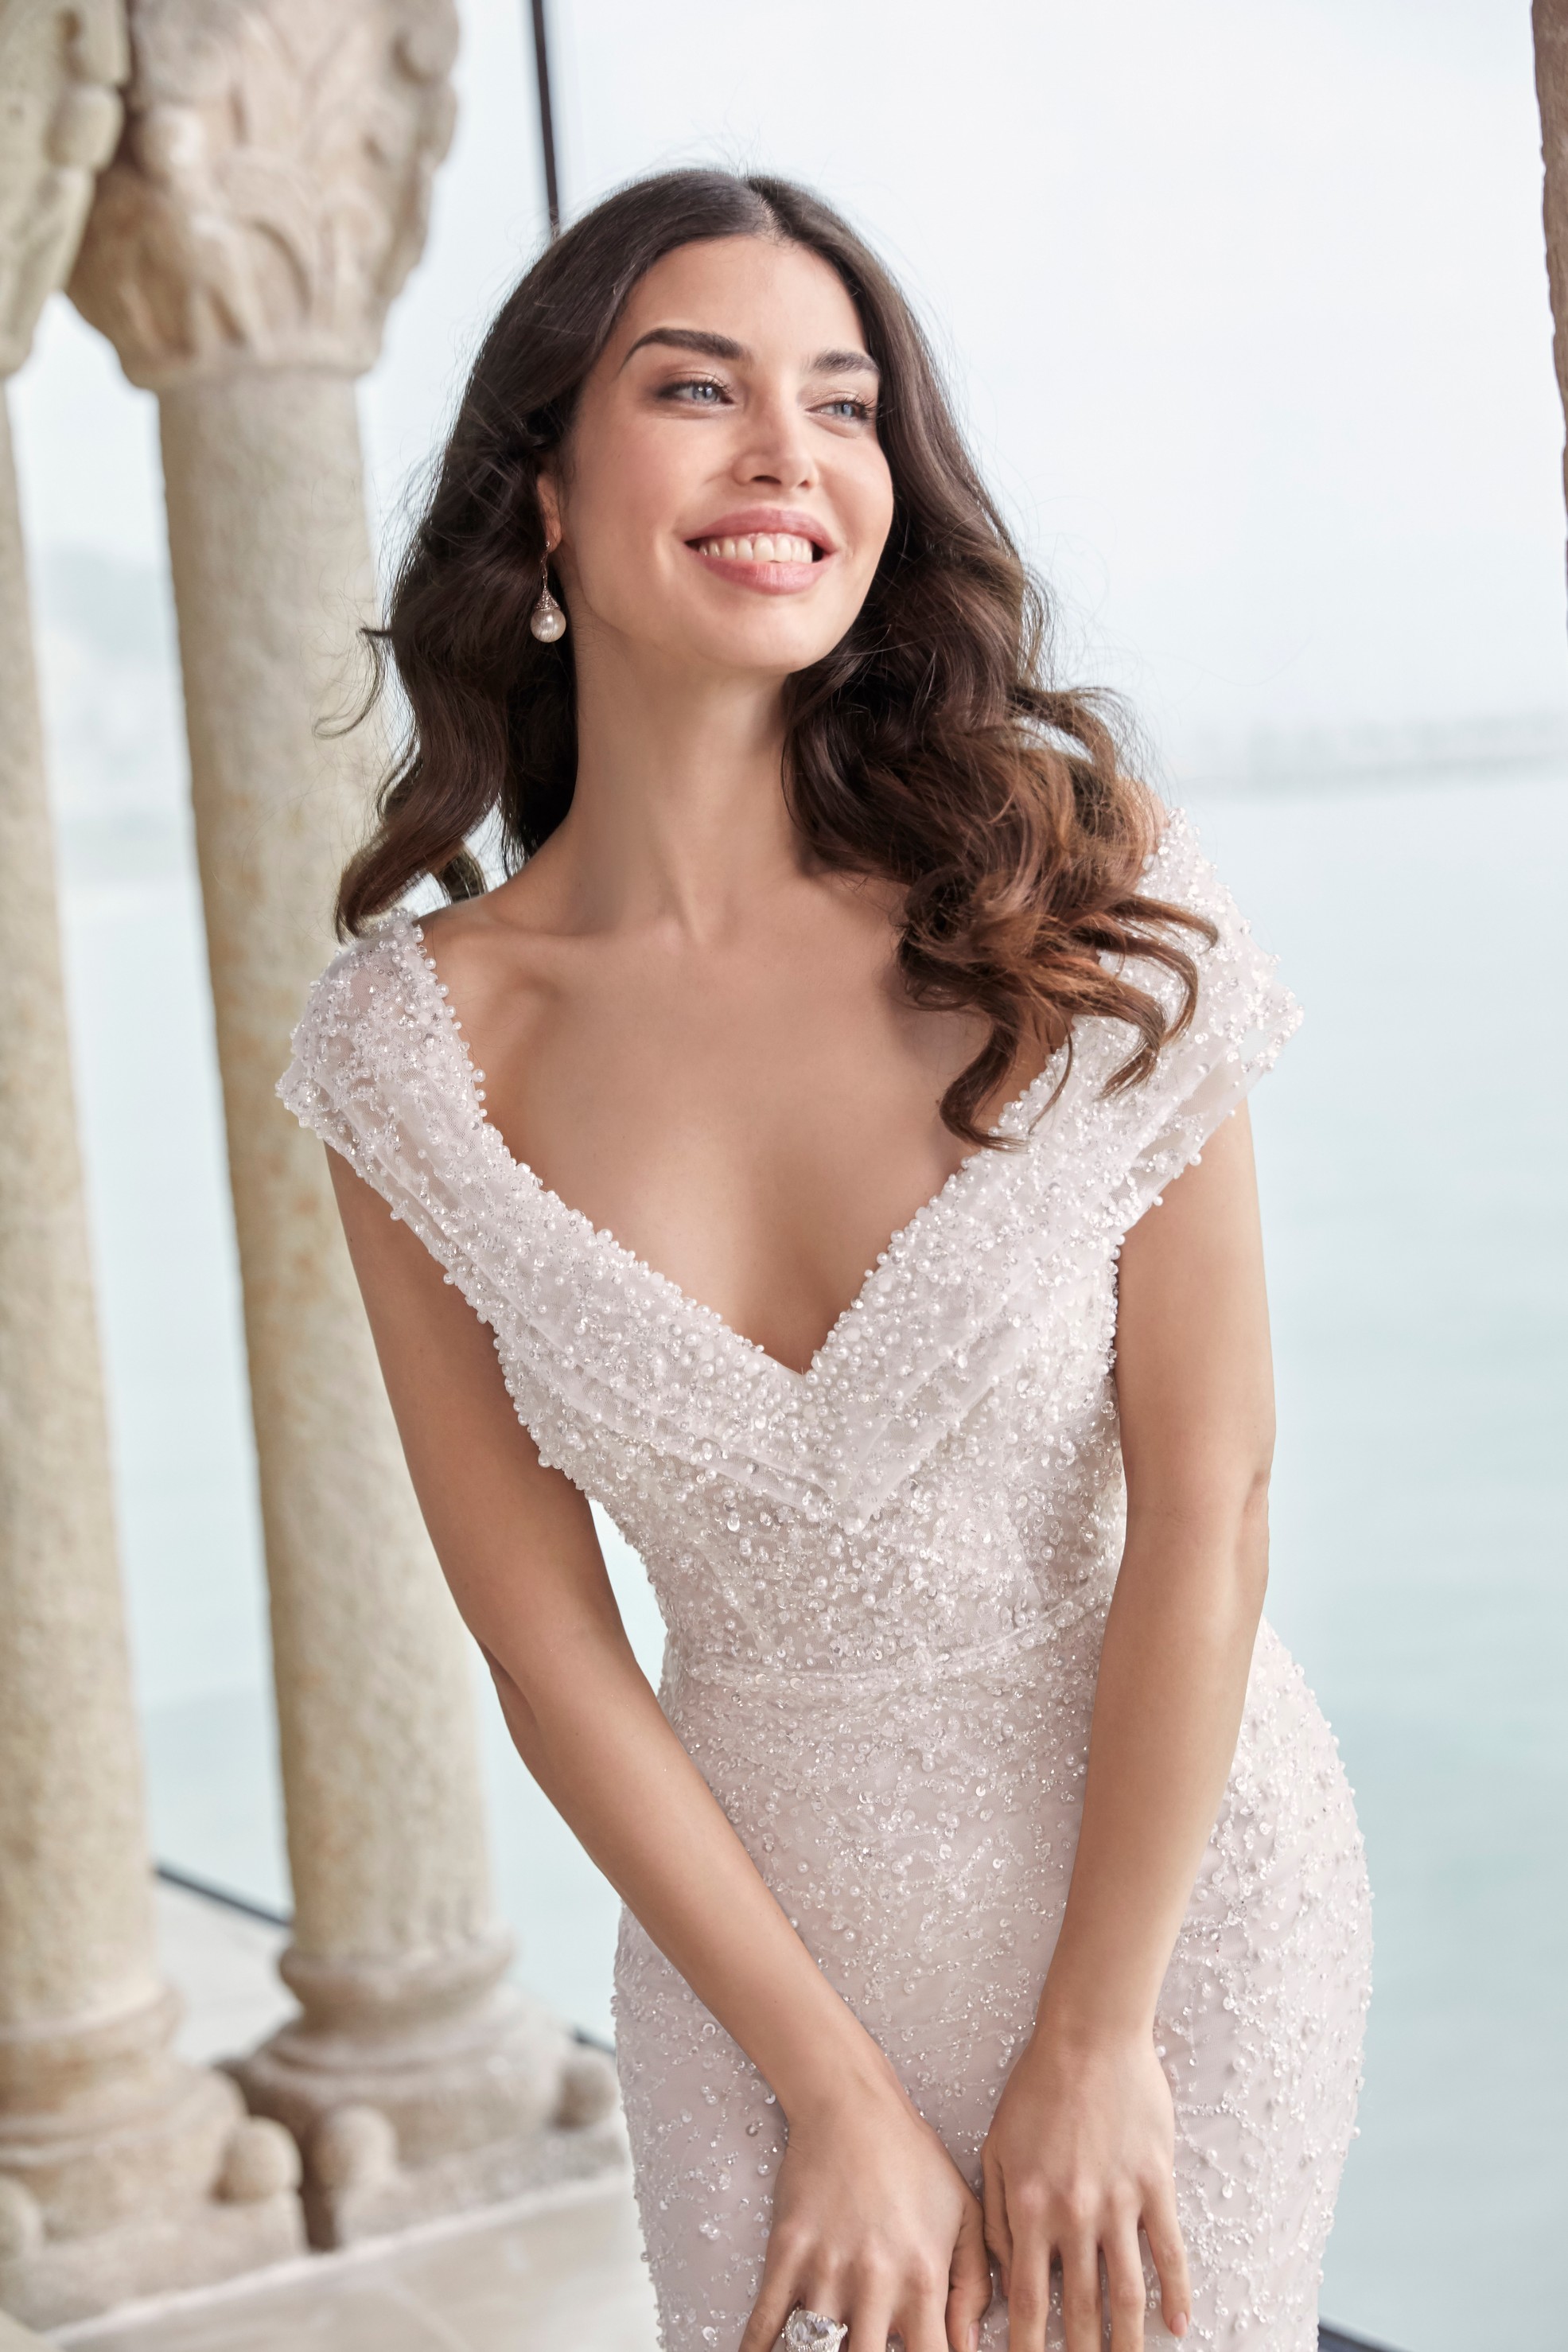 Brunette lady standing in museum in front of historical pillars and overlooking the ocean wearing heavily beaded fit and flare wedding dress with off the shoulder detail and pearl drop earrings